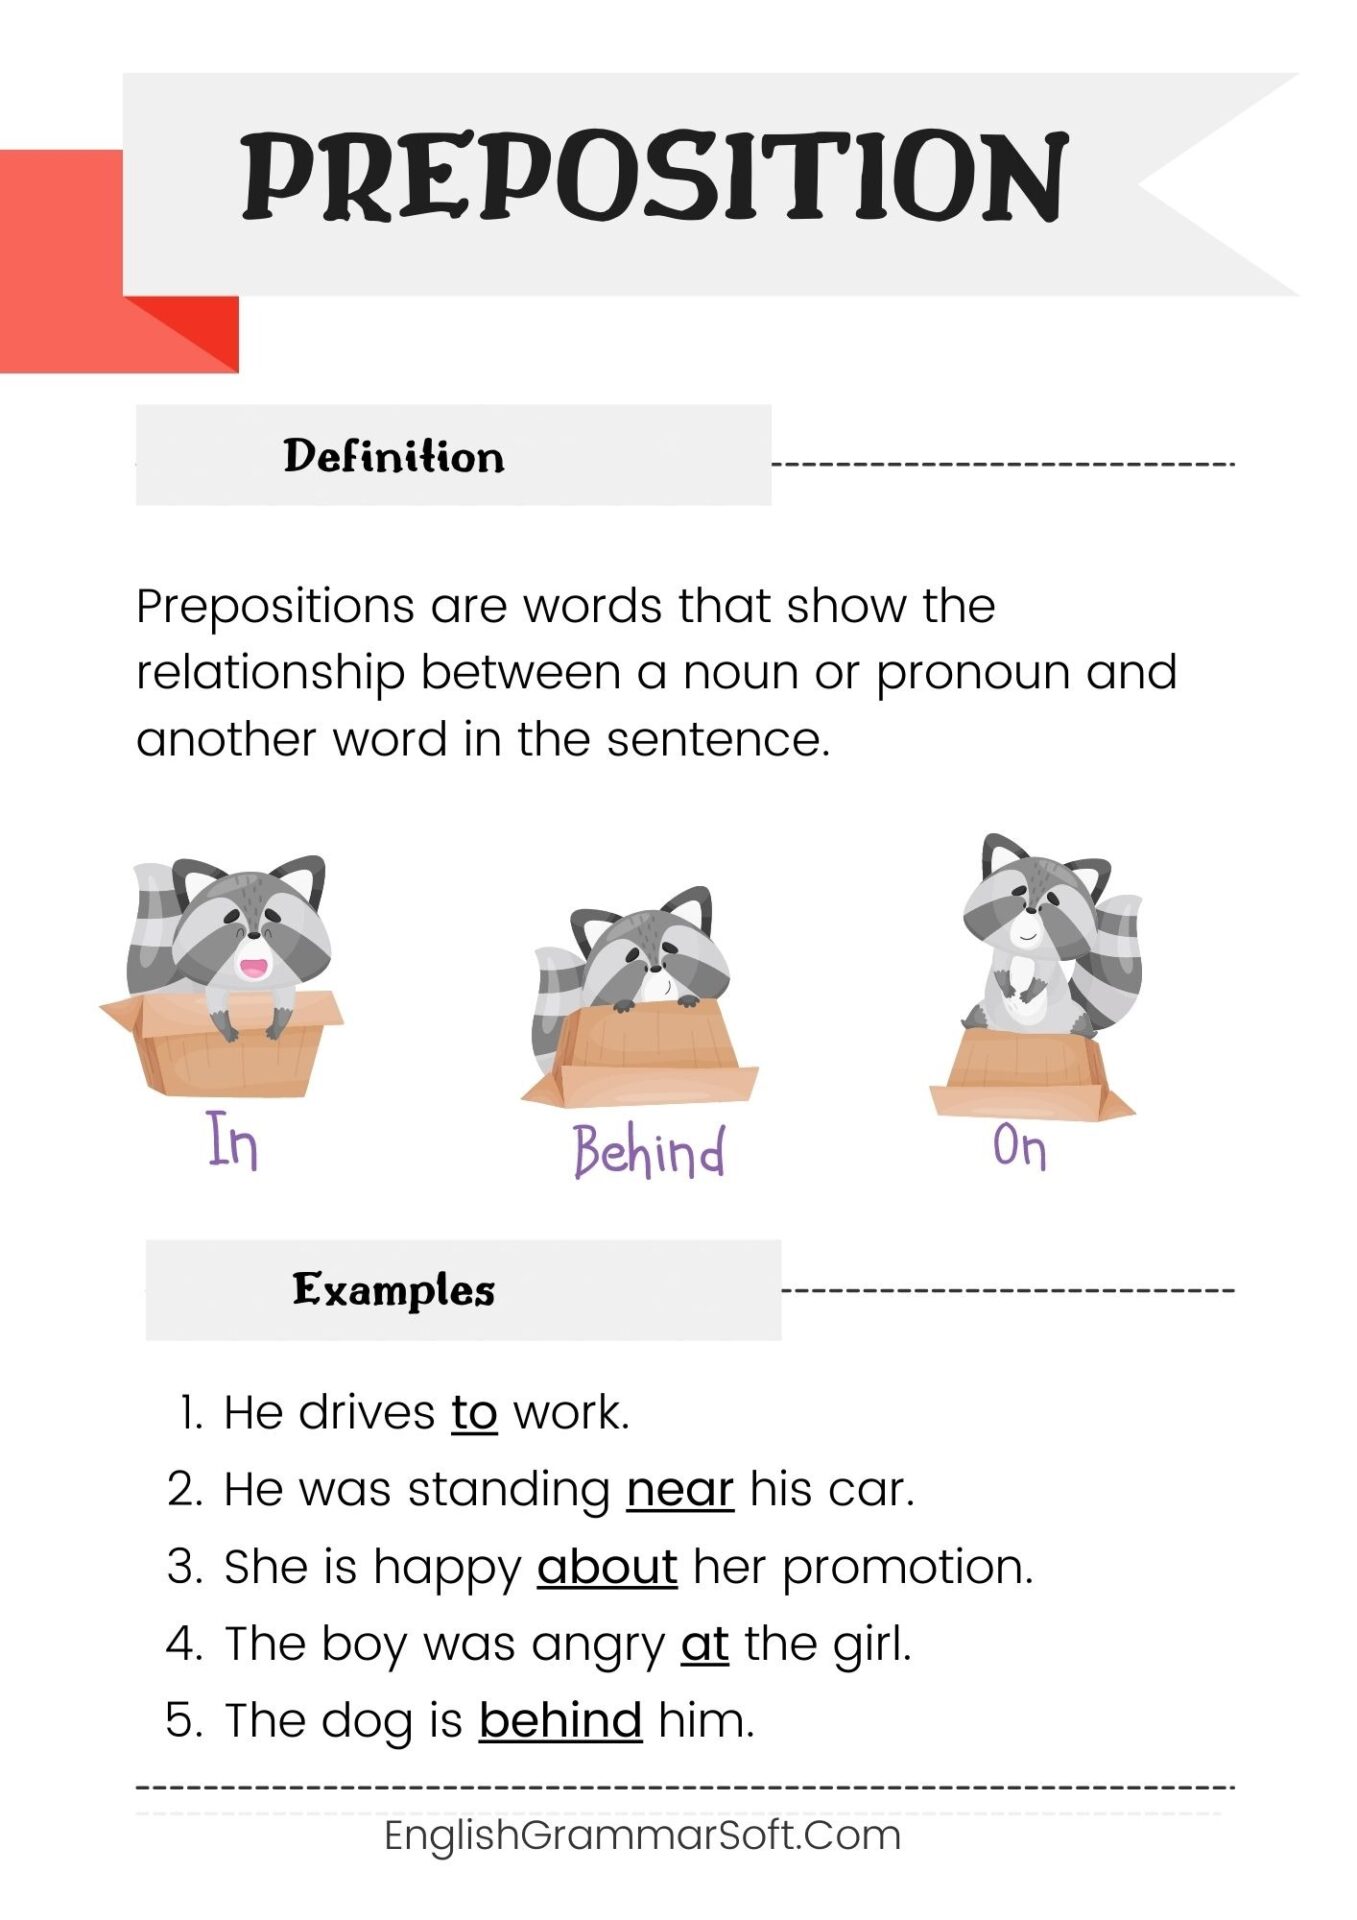 Printable Parts of Speech Posters Free (Preposition)